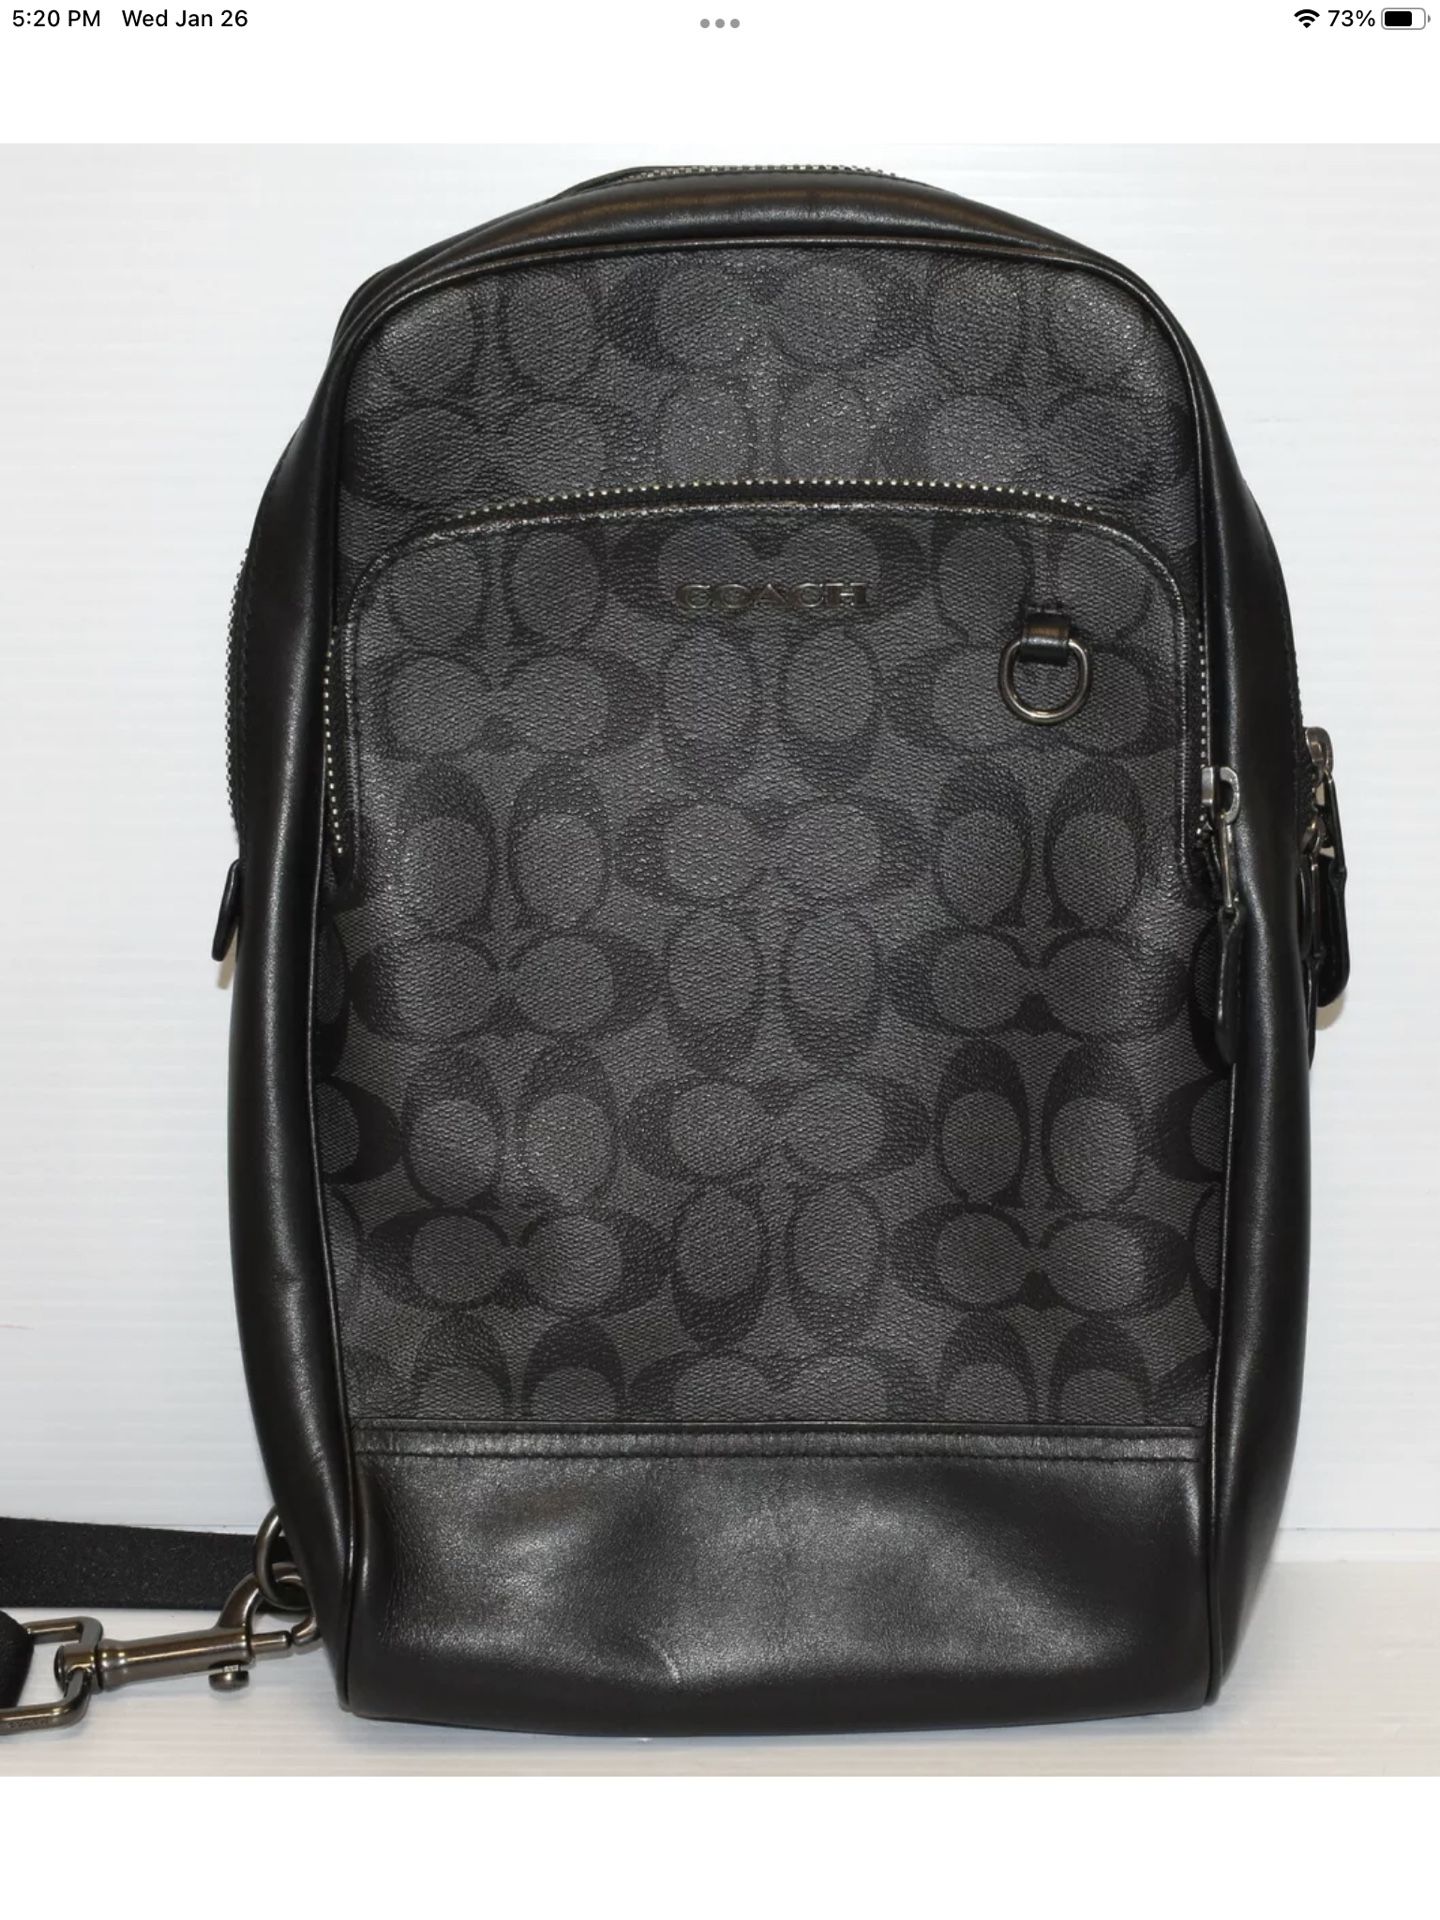  Coach C2932 Men's Graham Pack Bag Signature Canvas & Leather Charcoal Black - Like New Condition 